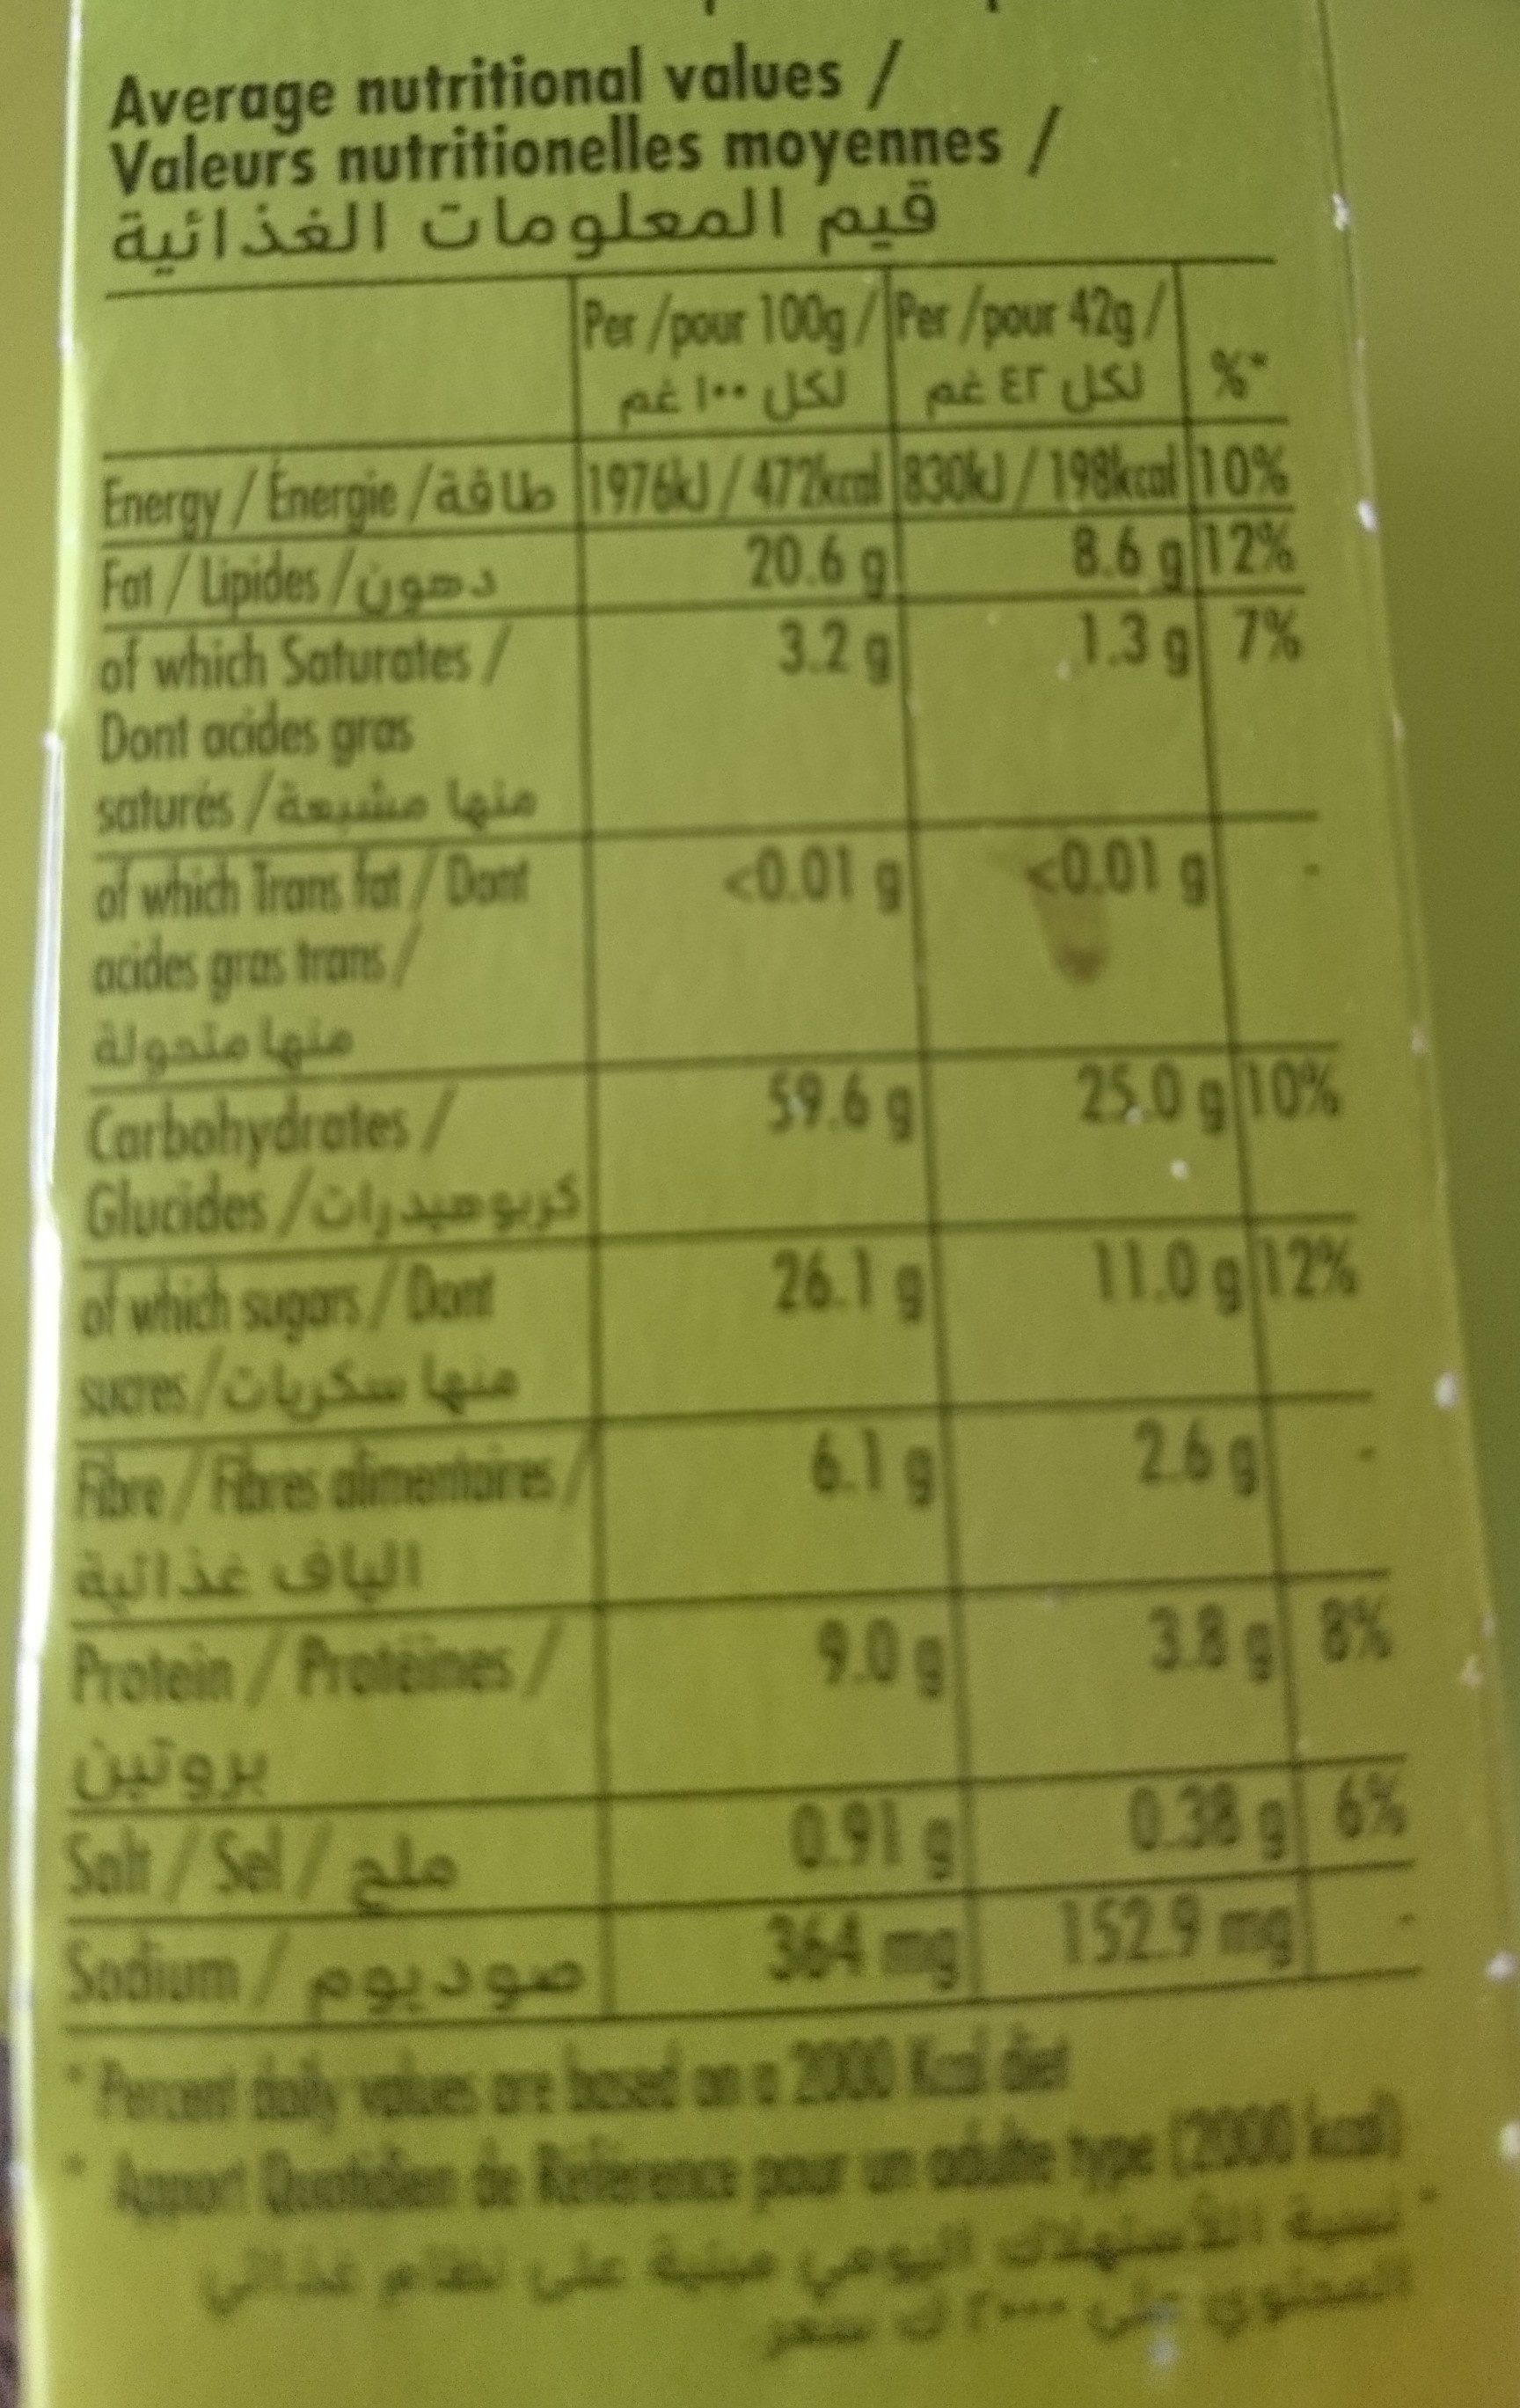 Crunchy oats and roasted almond - Nutrition facts - en